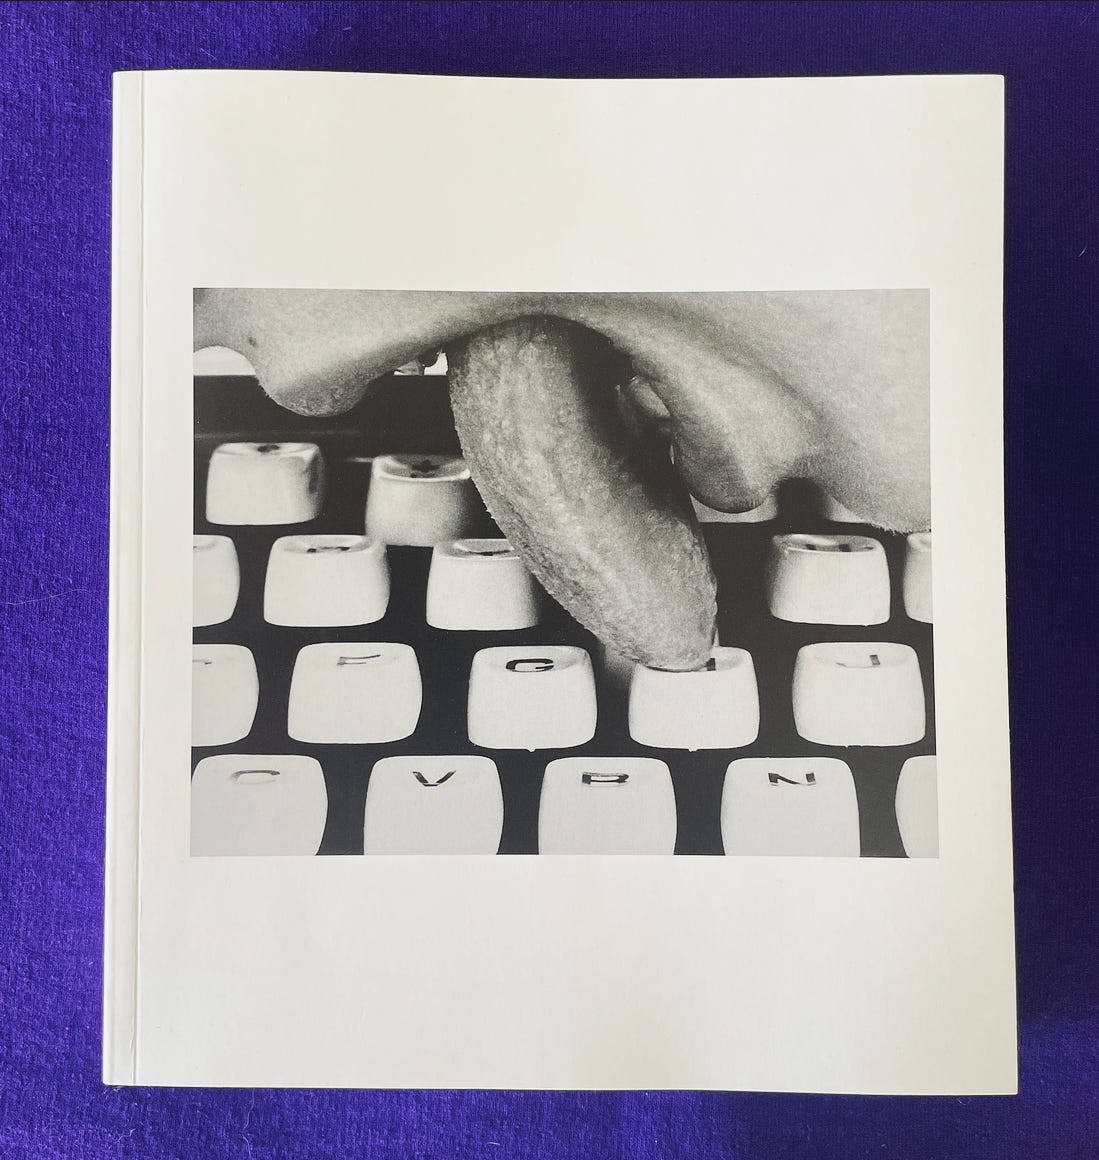 A square white book with a close-up photograph of a woman's mouth and her tongue gently touching the "h" key of a typewriter.